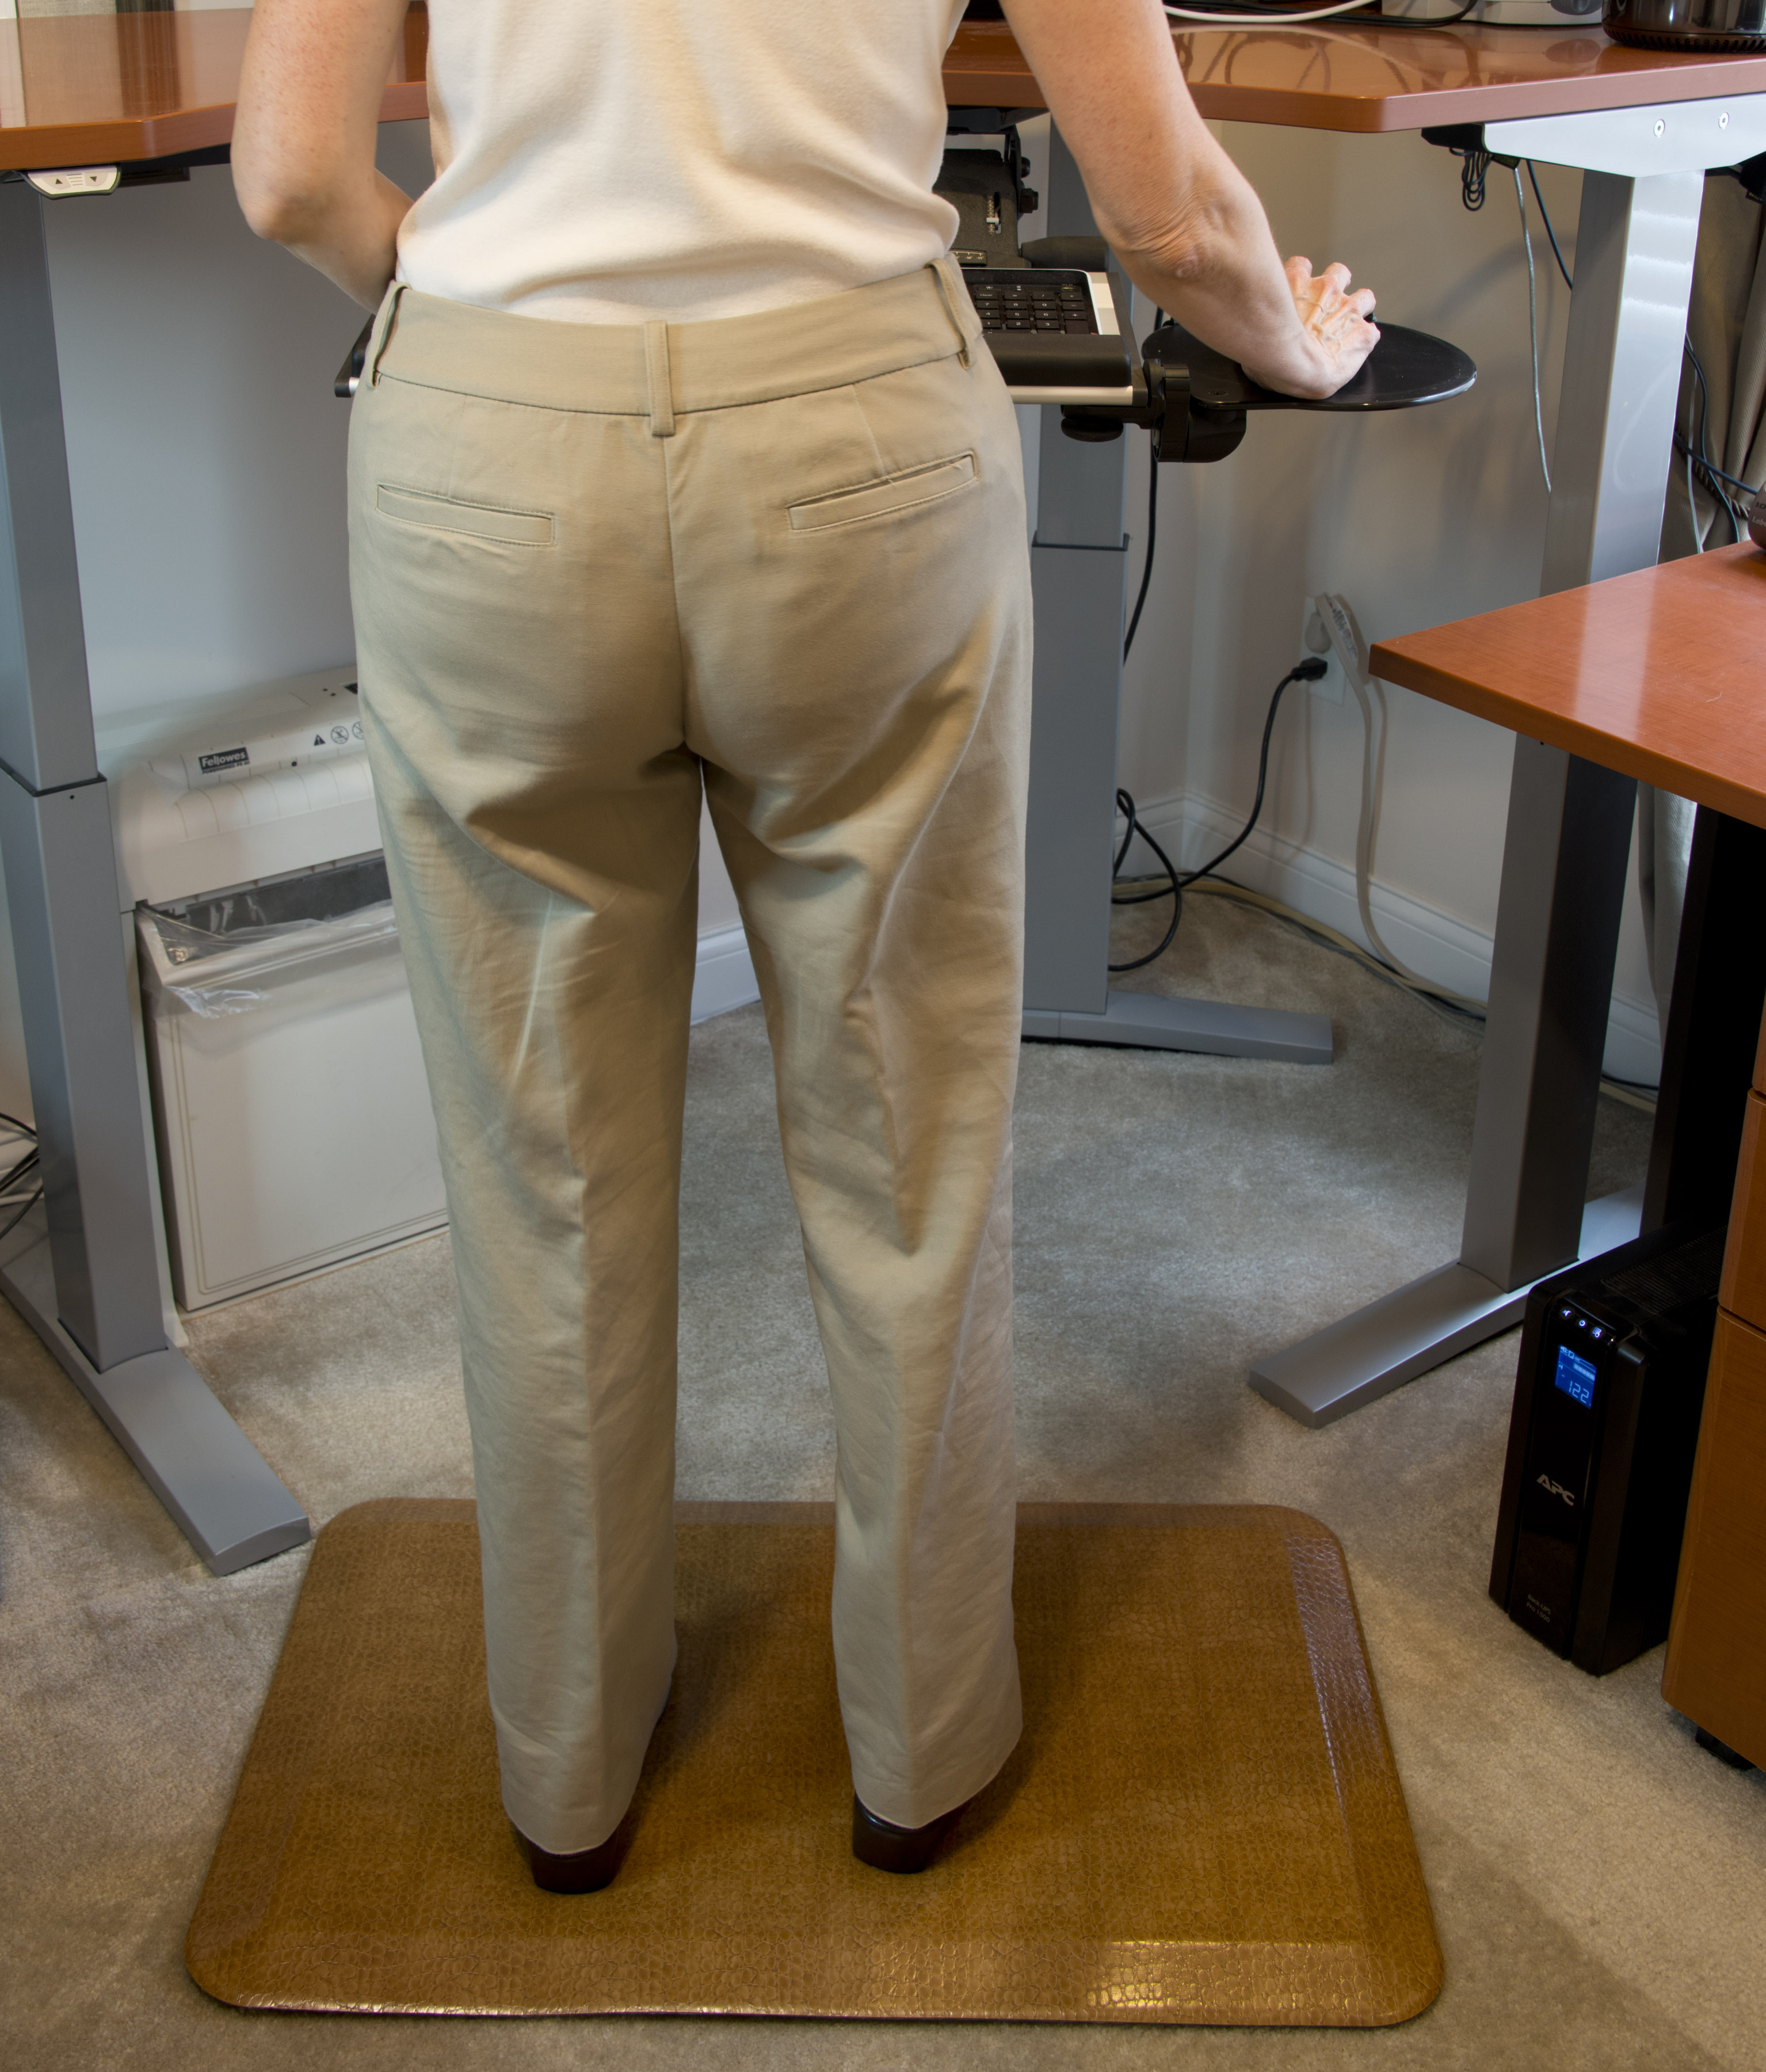 Standing Desk Anti-fatigue Mats feature a 3/4-inch thick, high-density foam core to comfort workers who use standing or sit-to-stand desks